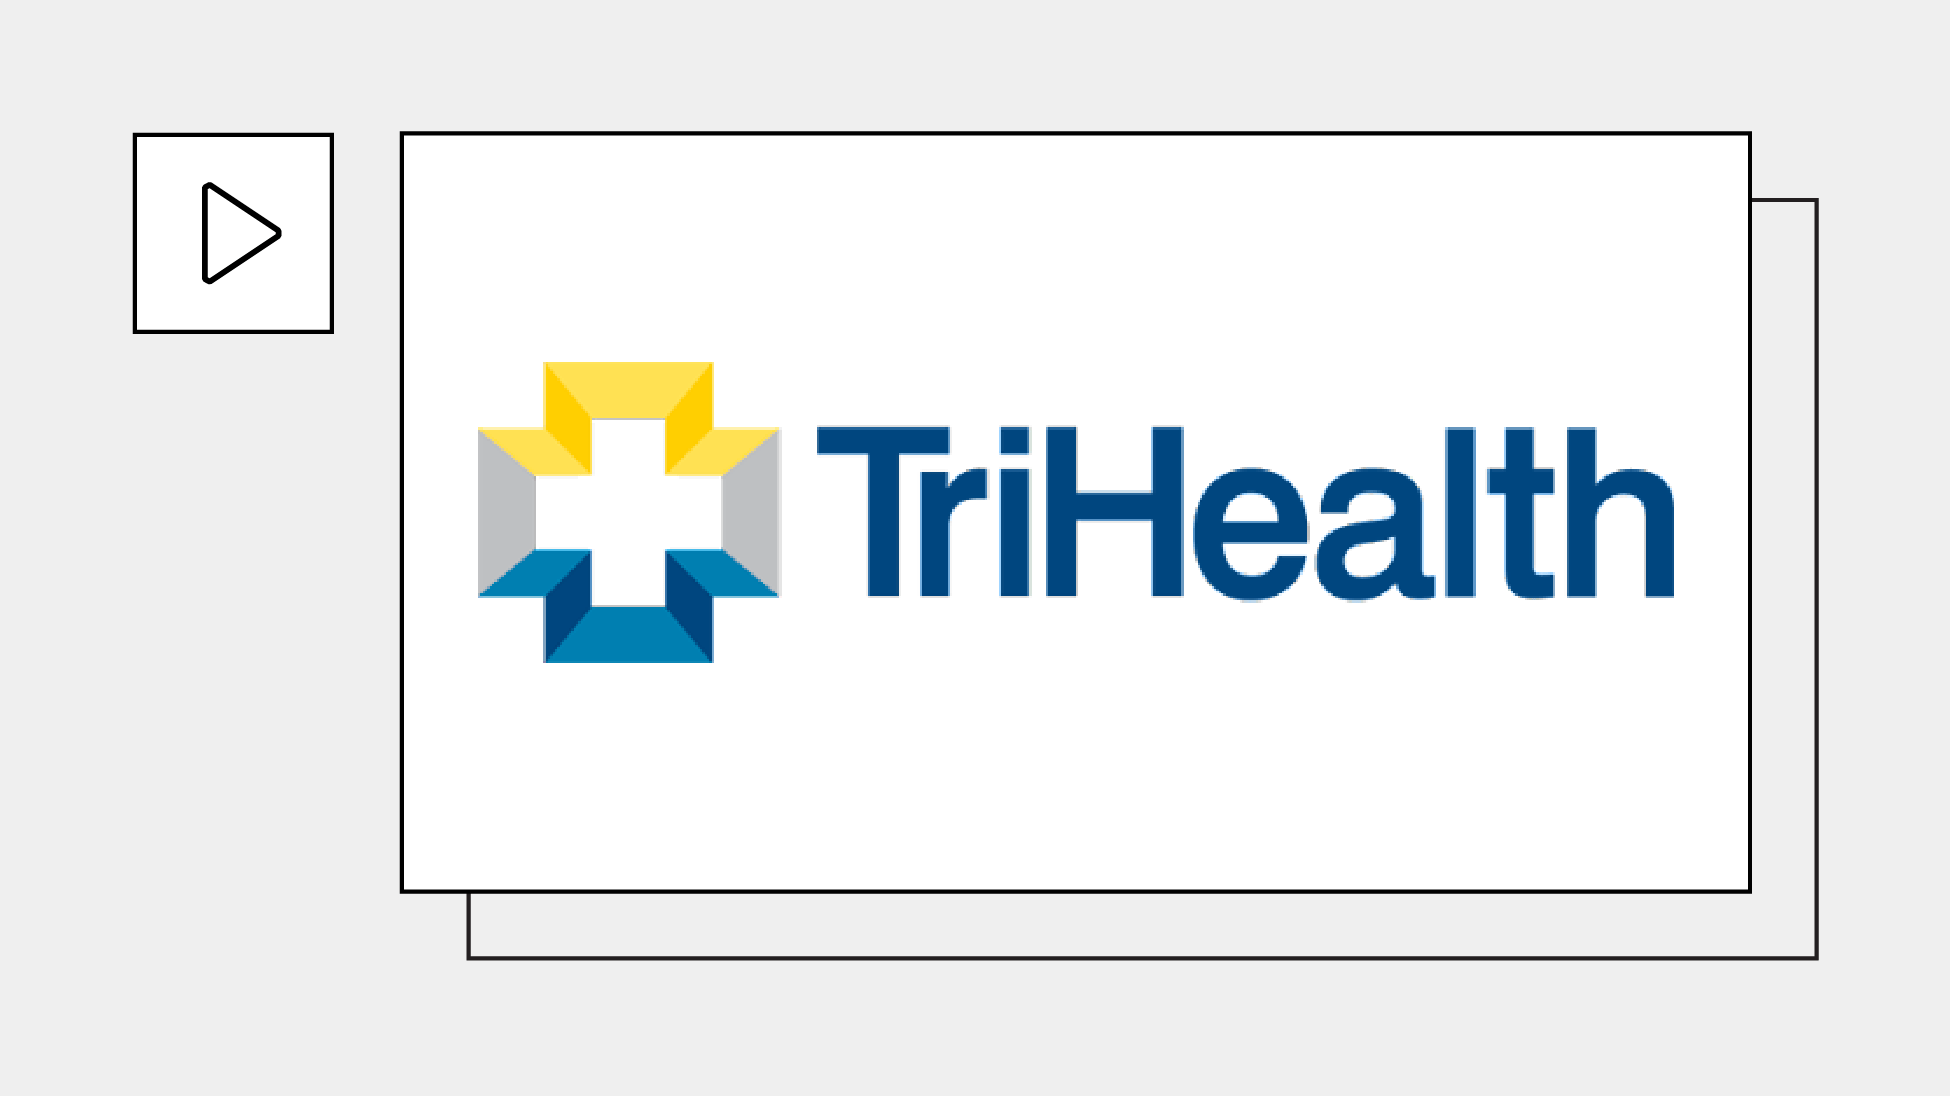 Accelerate clinical trial enrollment and site activation